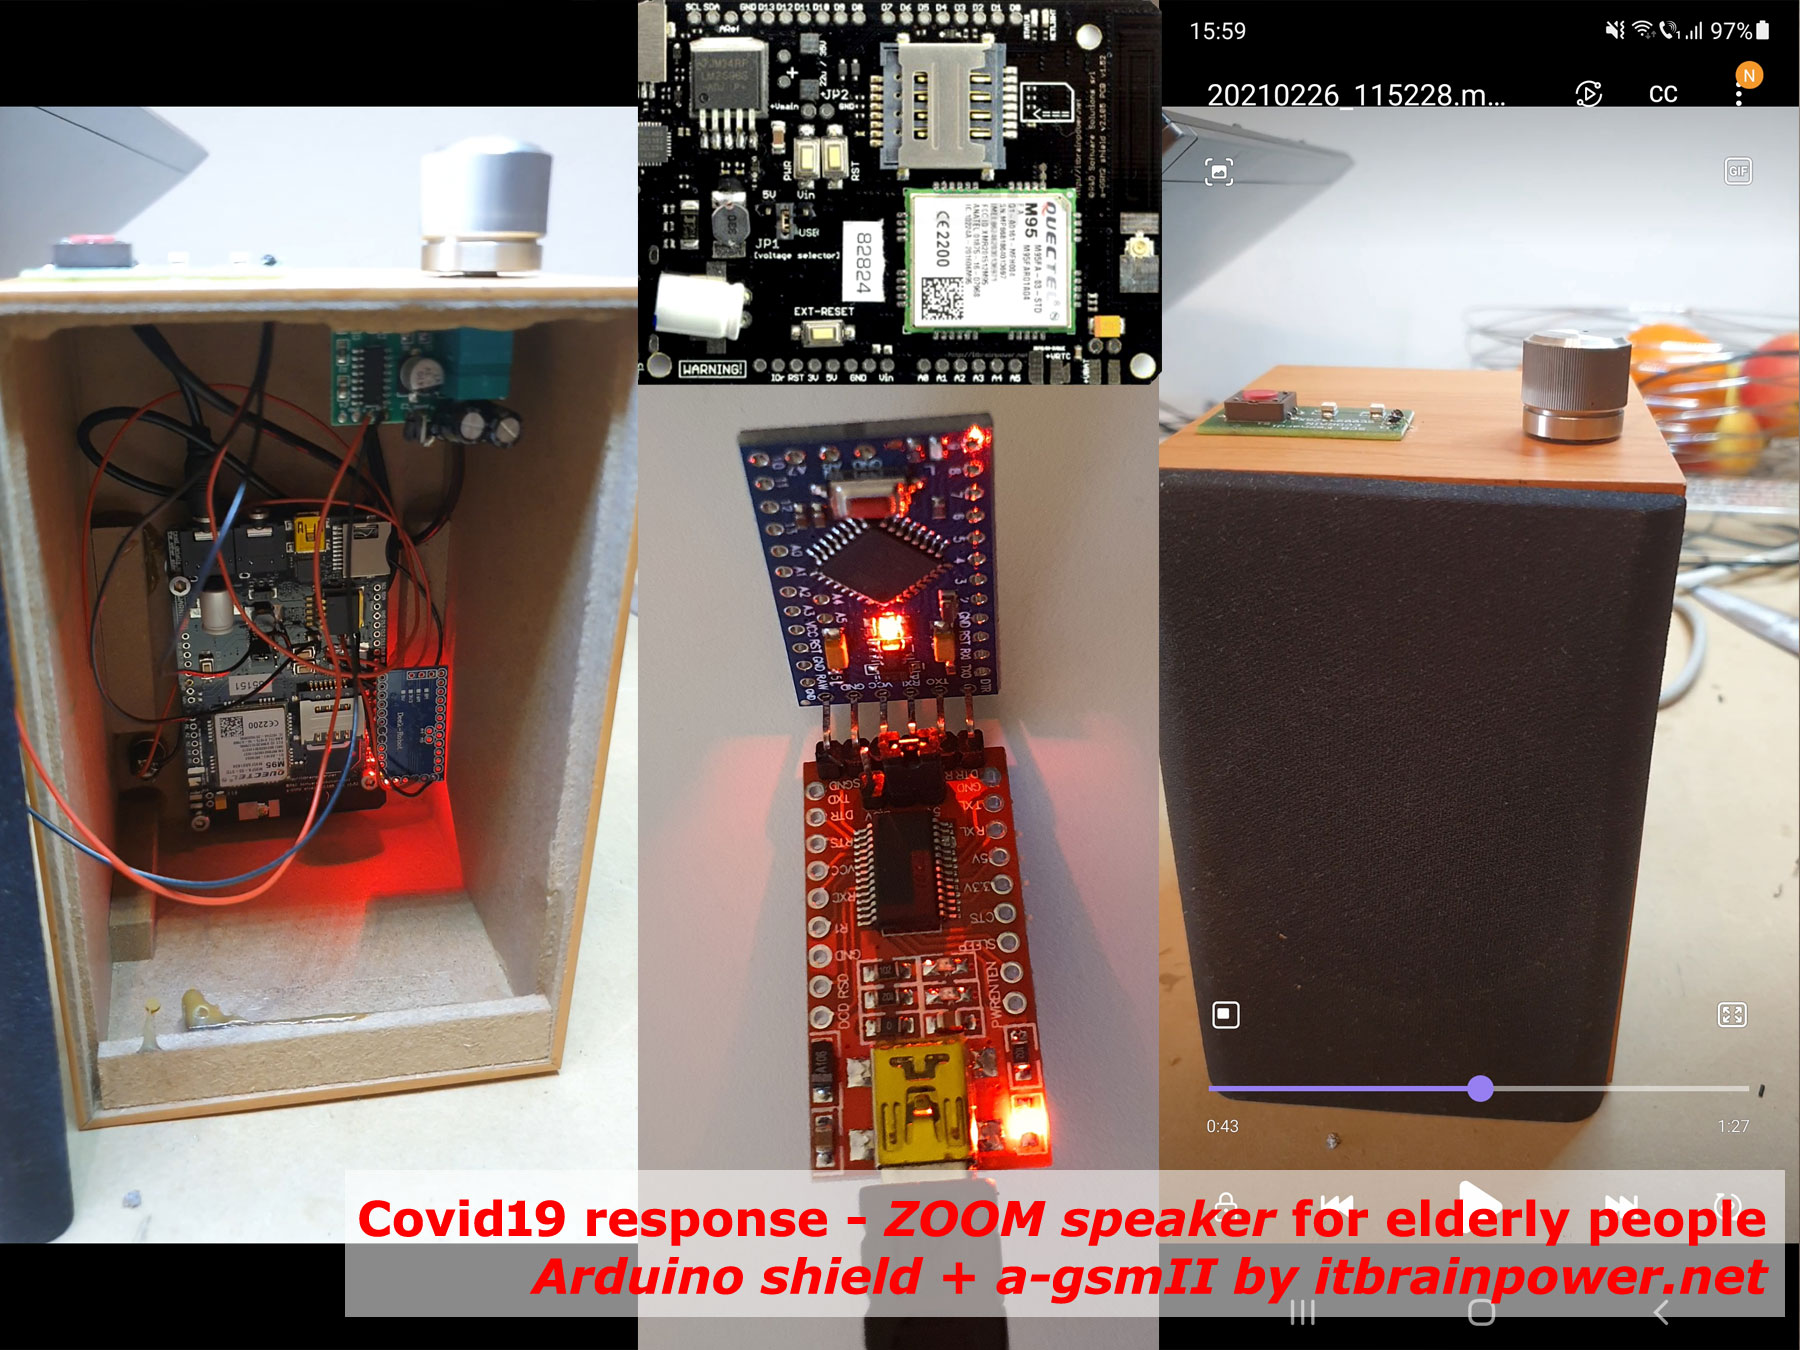 Covid19 response - helping elderly people to have access to their spiritual life - simple ZOOM speaker using Arduino shield and a-gsmII by itbrainpower.net modem